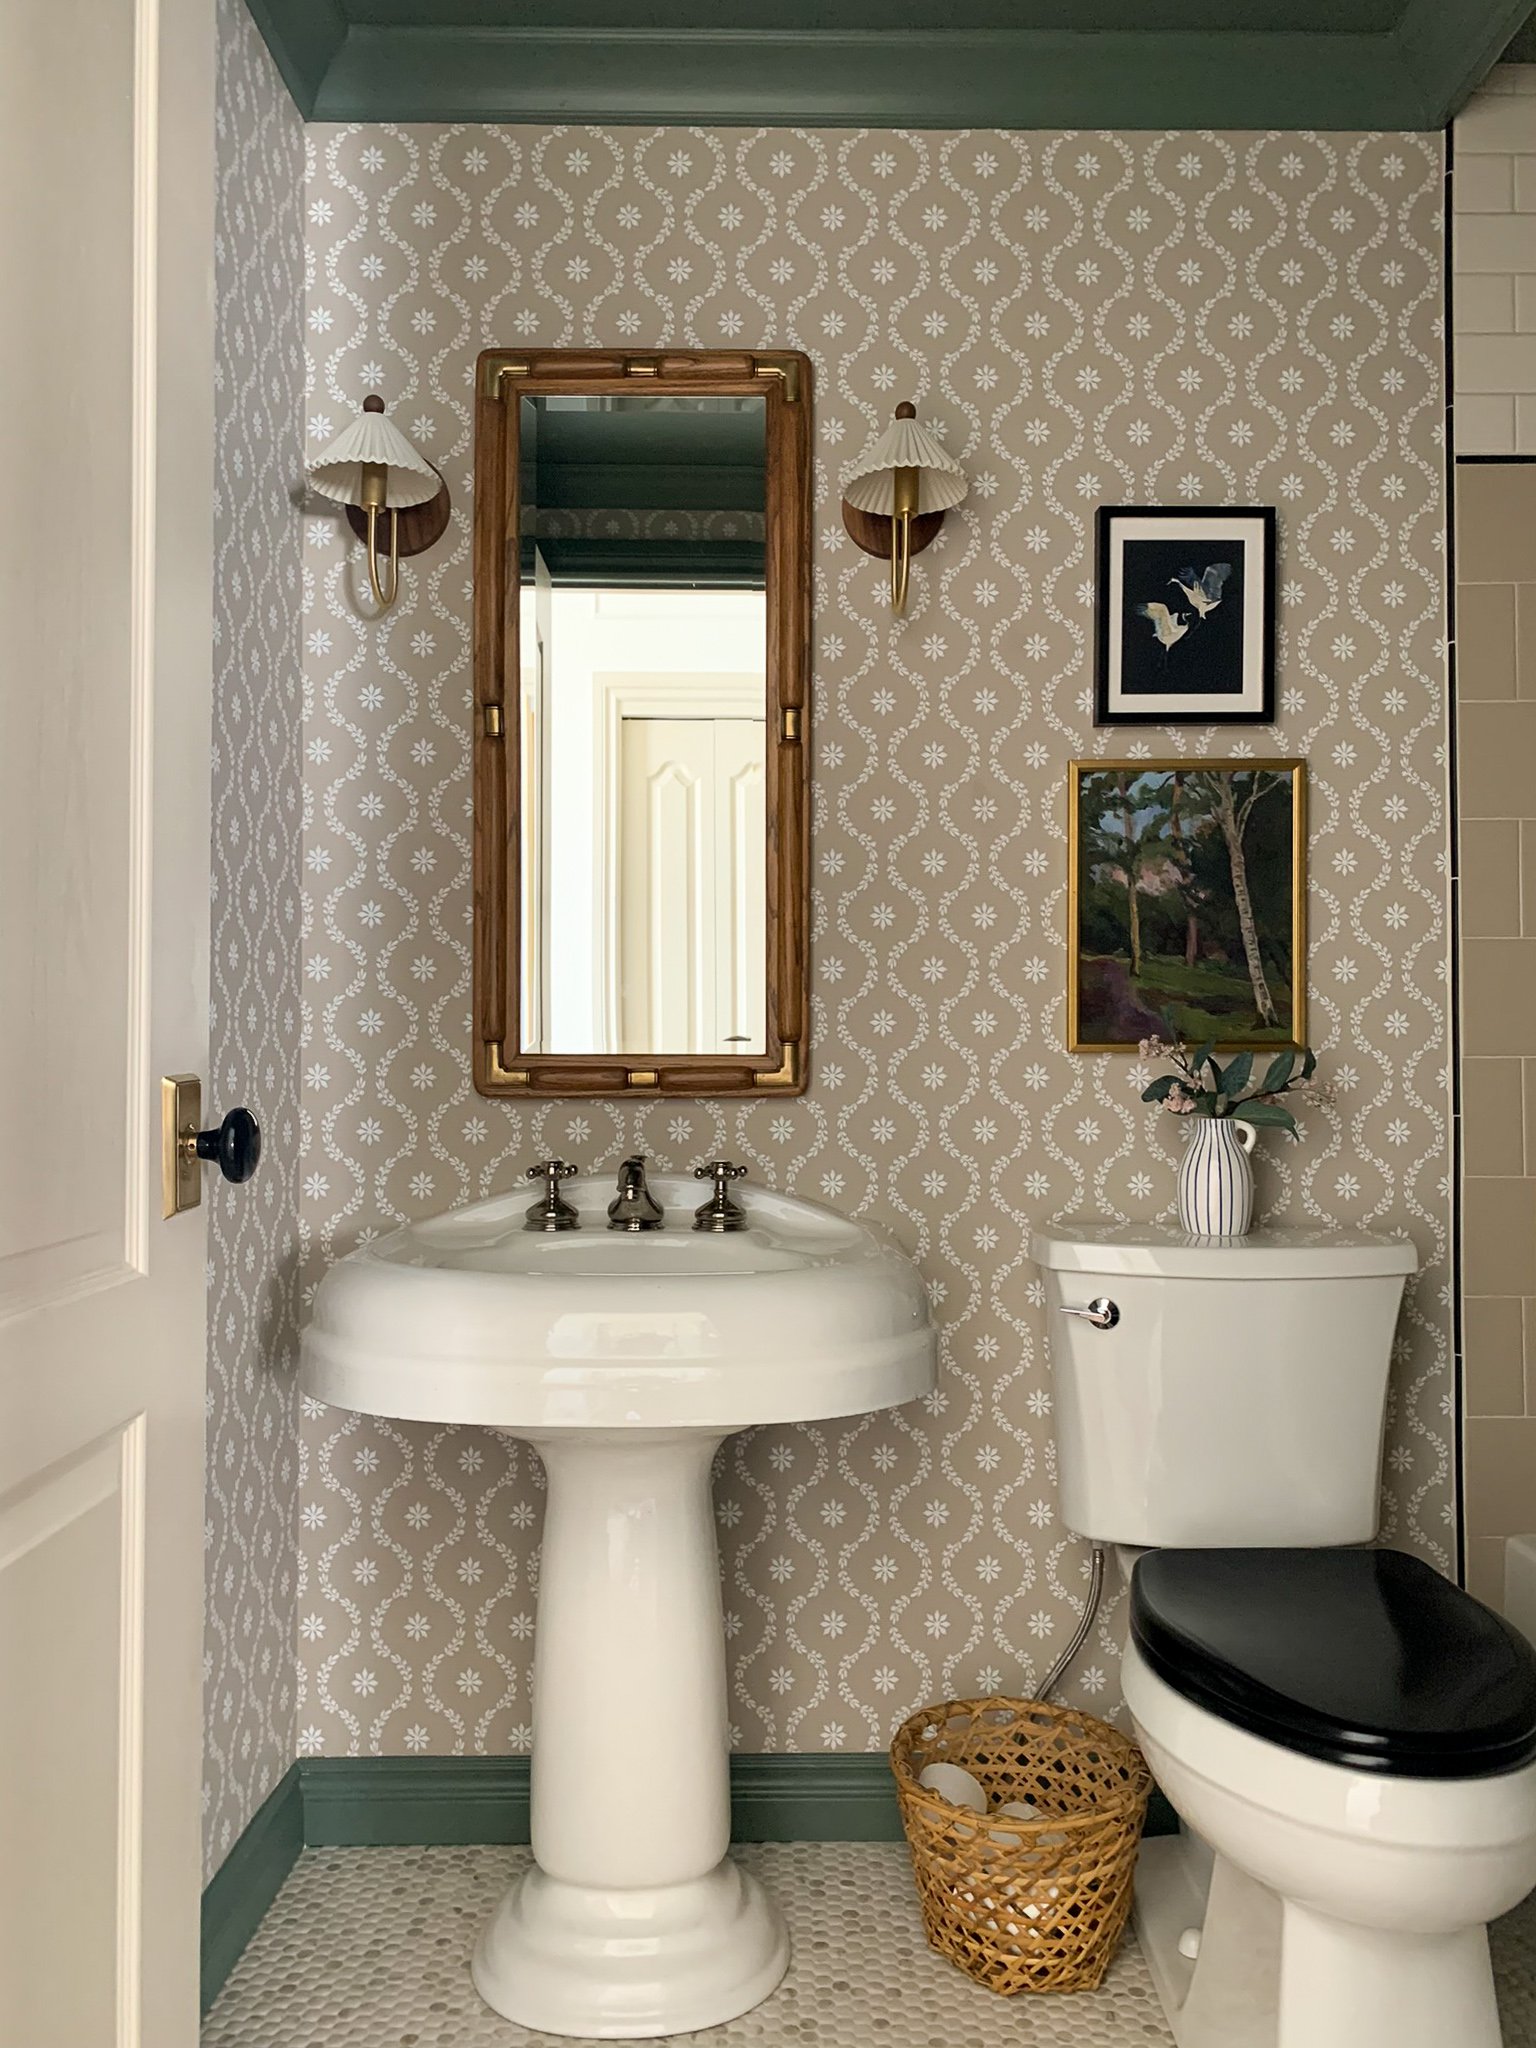 Modern traditional Bathroom with green ceiling and crown moulding, floral beige and white wallpaper, brass  and walnut scalloped shade sconces, vintage wood mirror, art stacked over toilet, penny tile and vintage pedestal sink